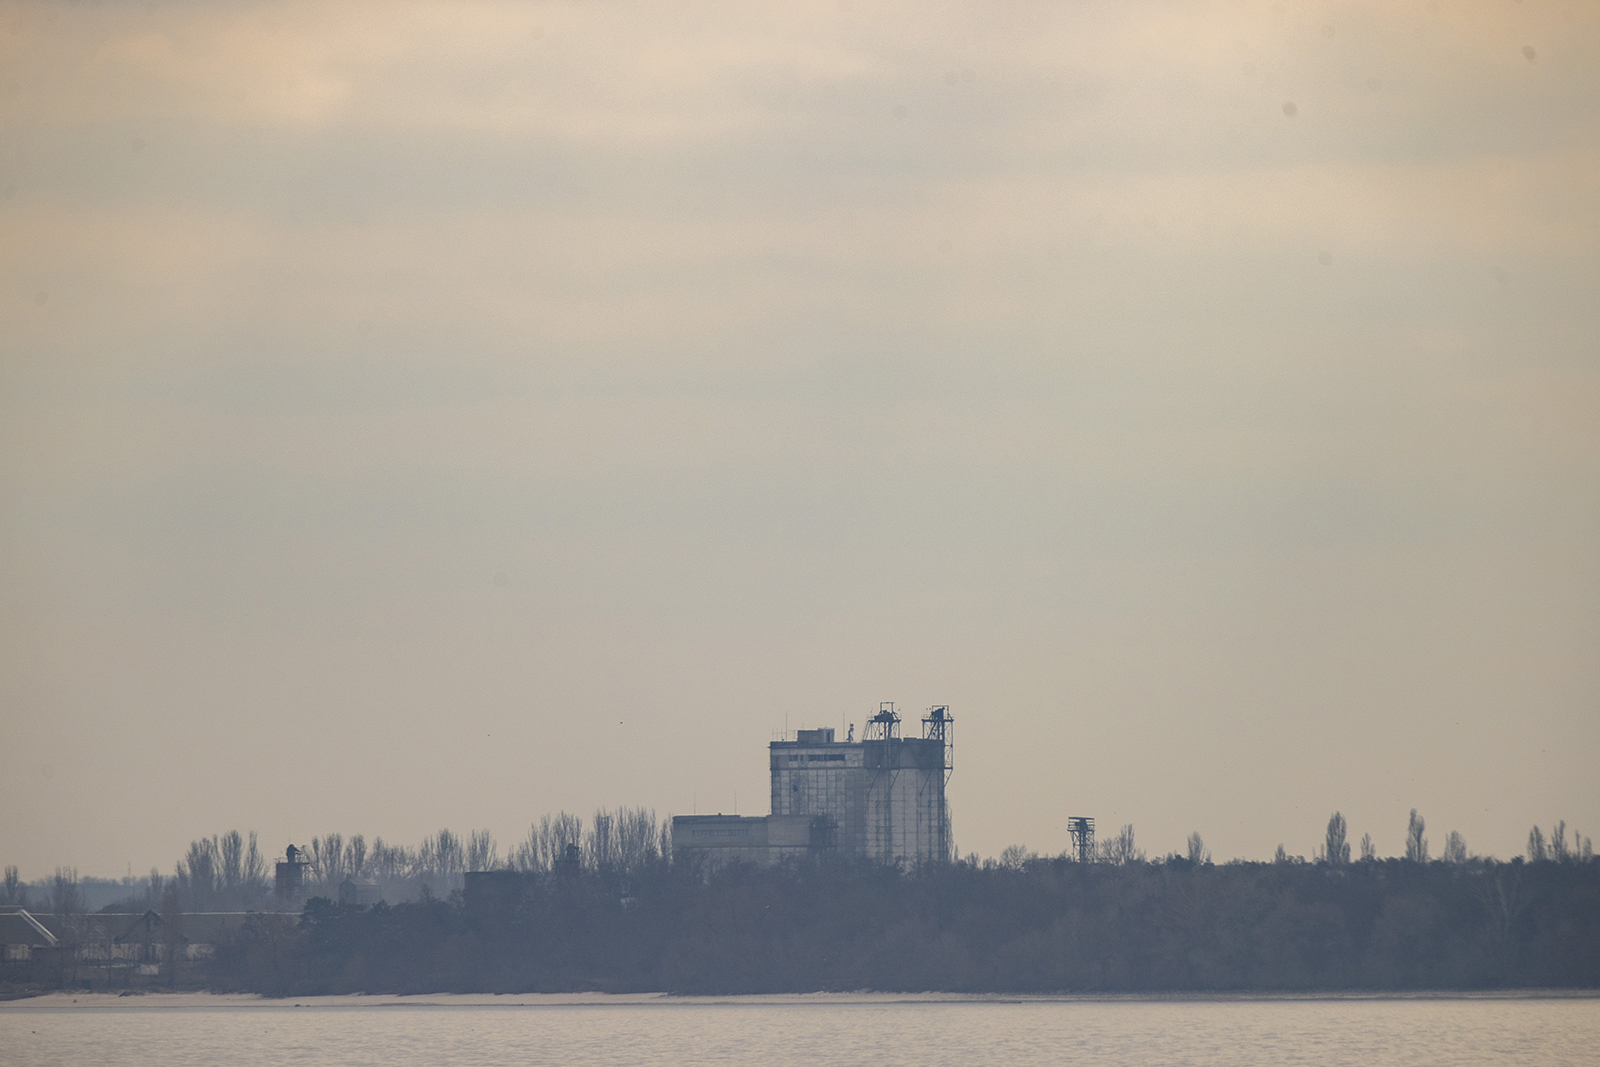  A general view of Zaporizhzhia Nuclear Power Plant is pictured in Nikopol on March 3.